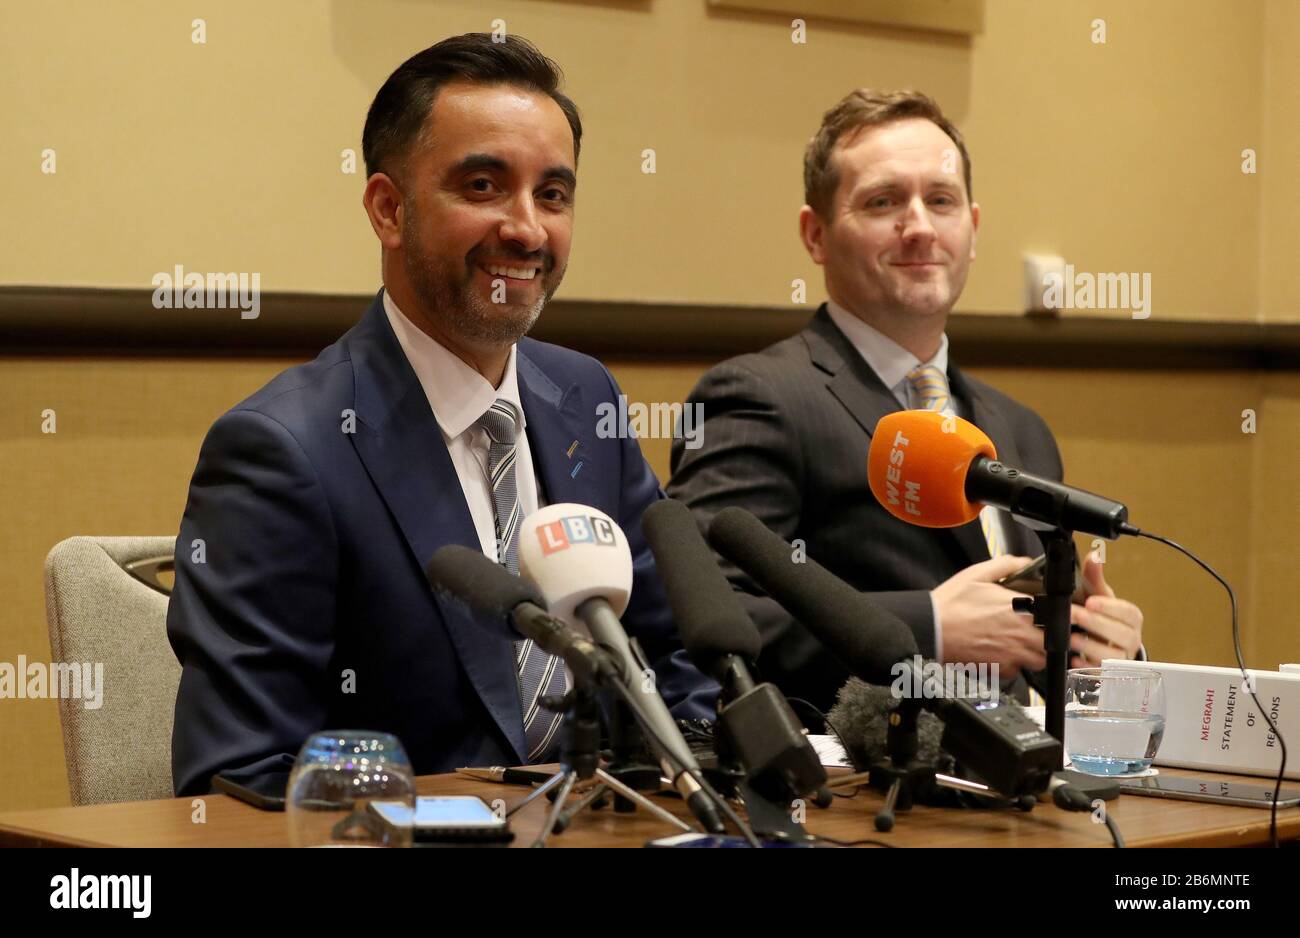 Lawyer Aamer Anwar (left) speaks to the media at the Marriott Hotel, Glasgow, after the Scottish Criminal Cases Review Commission found that a miscarriage of justice may have occurred in the conviction of Abdelbaset al-Megrahi for the Lockerbie bombing, paving the way for a new appeal. Stock Photo